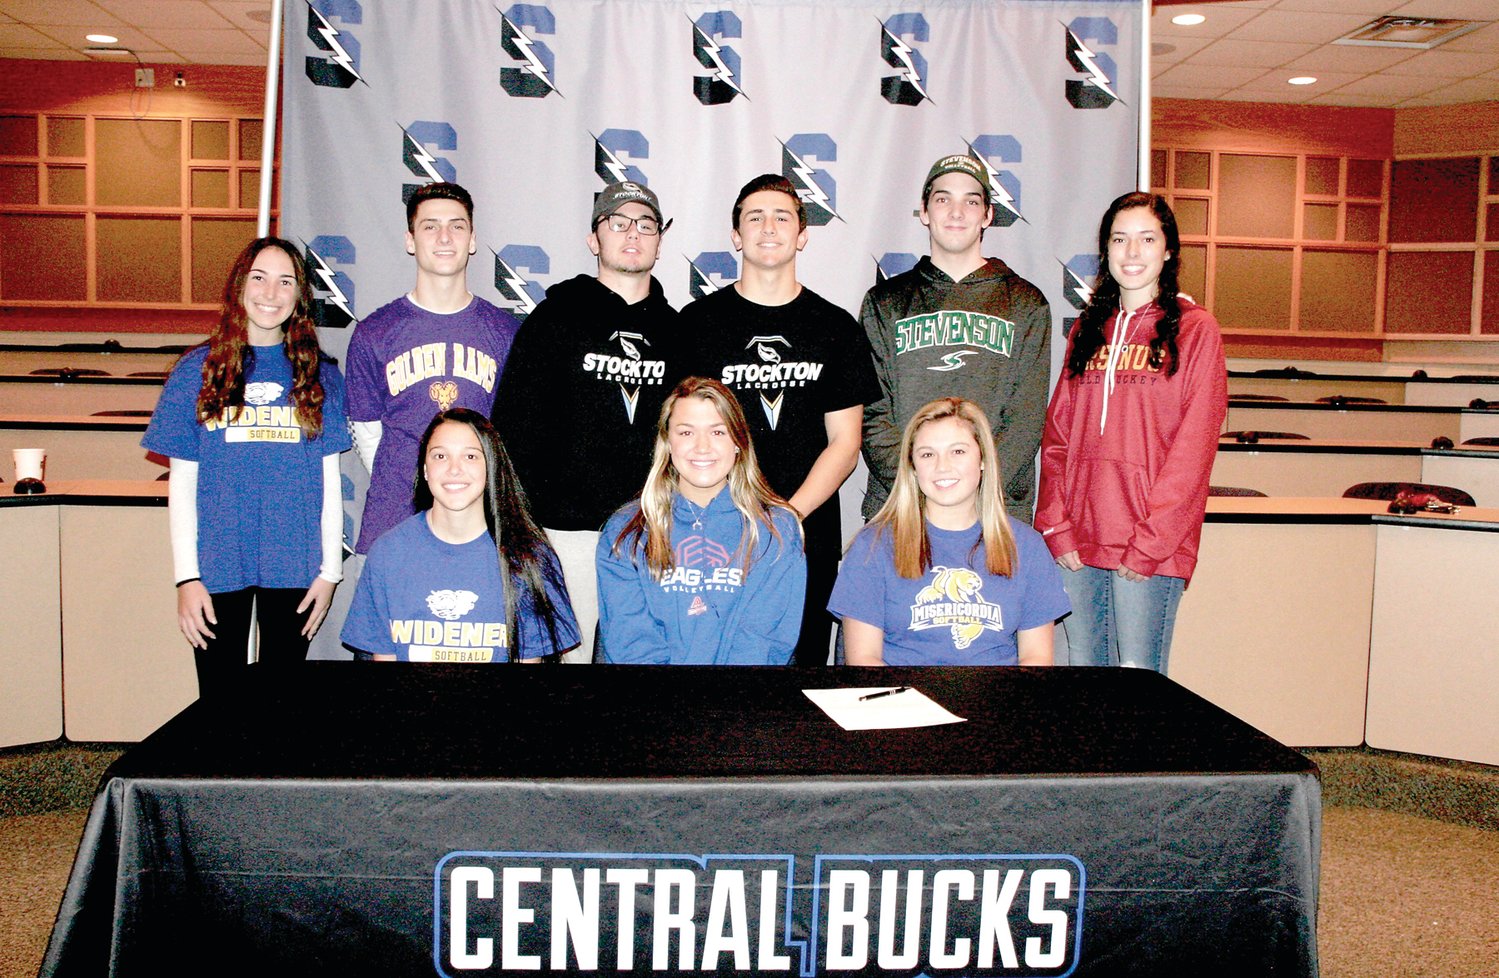 At Central Bucks South’s signing ceremony are, from left, back row, Ally McDaid (Widener), Joe Martino (West Chester), Colin Bernstein (Stockton), Tyler Horvath (Stockton), Aidan O’Brien (Stevenson), Madelyn Cooper (Ursinus); front row, Olivia Robinson (Widener), Allie Burke (American) and Sophia DeFebo (Misericordia). Photograph by Mary Jane Souder.